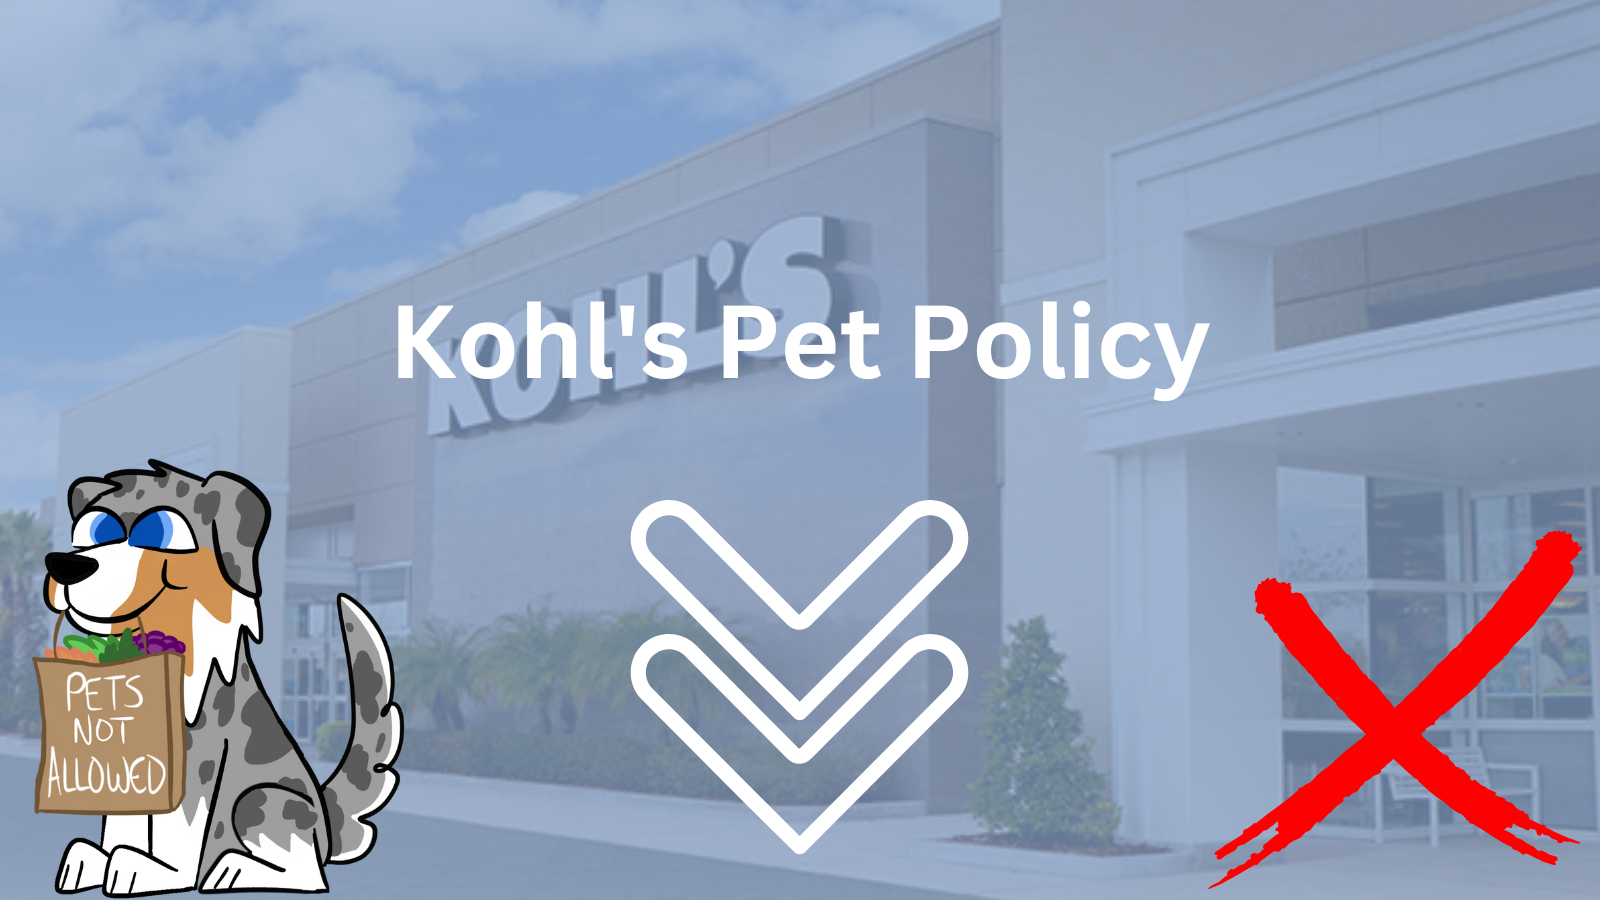 Image Text: "Kohl's Pet Policy"